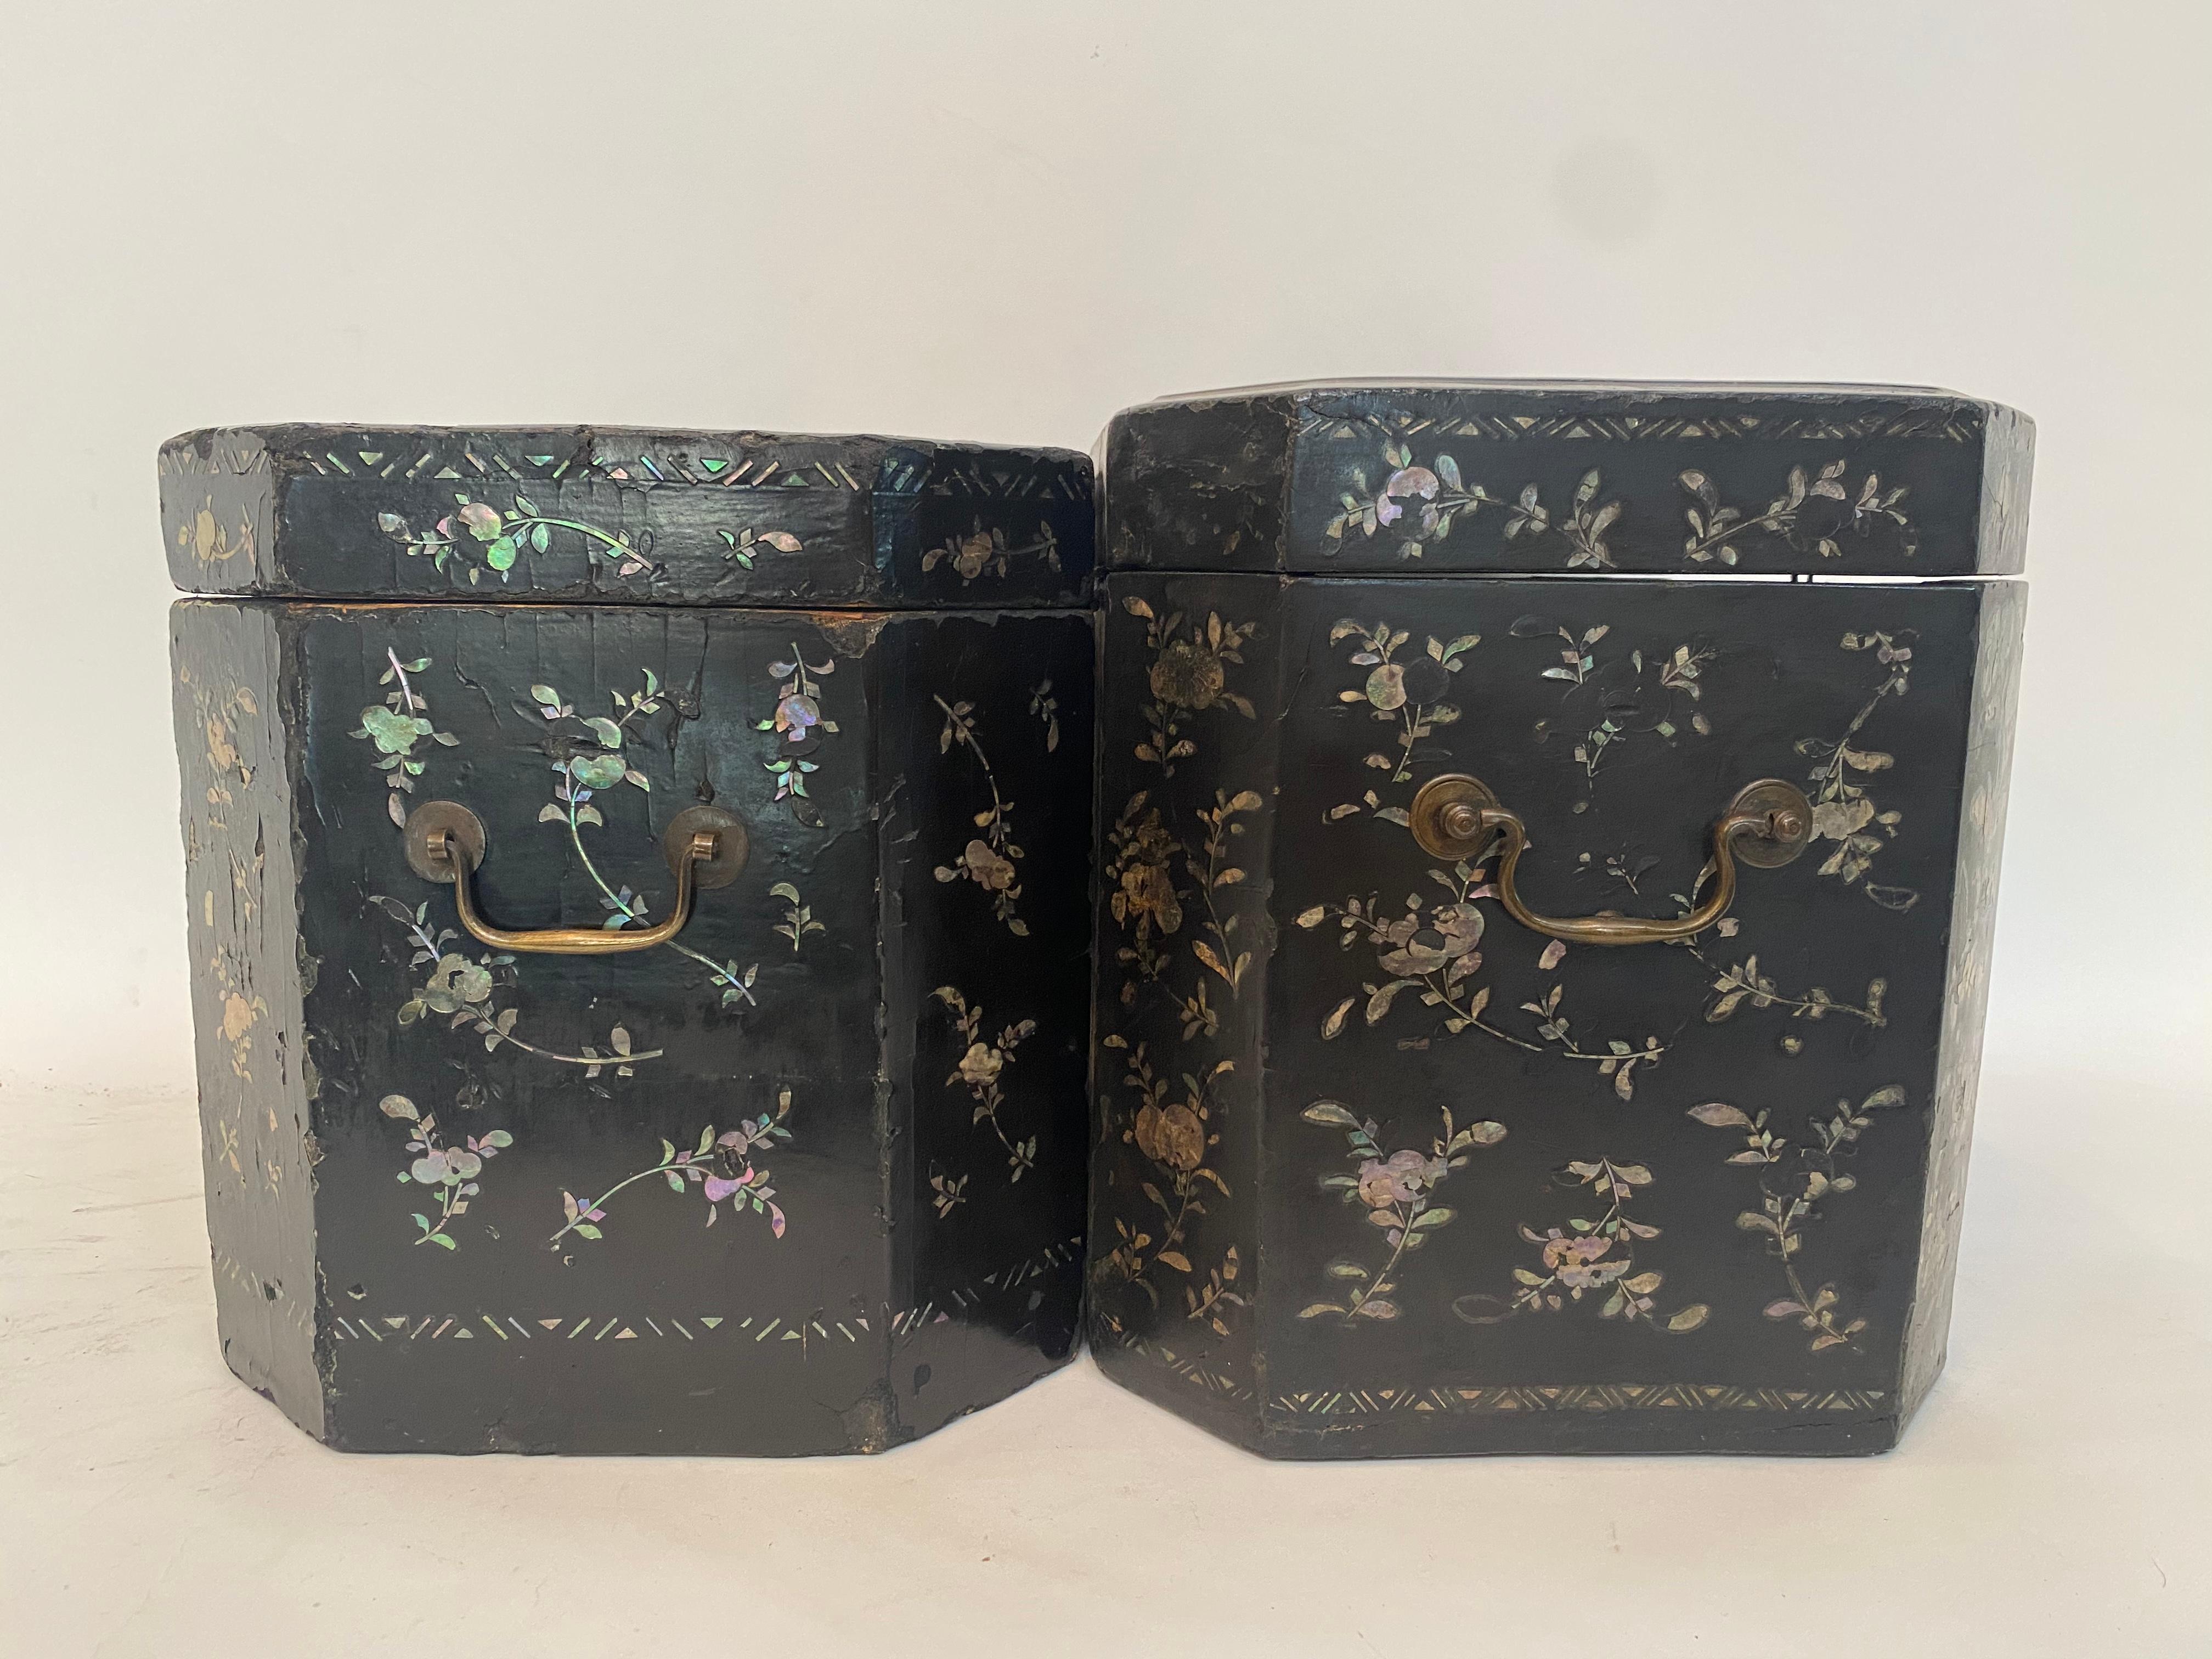 19th Century Two Shell Inlaid Black Lacquer Big Chinese Storage Boxes For Sale 4